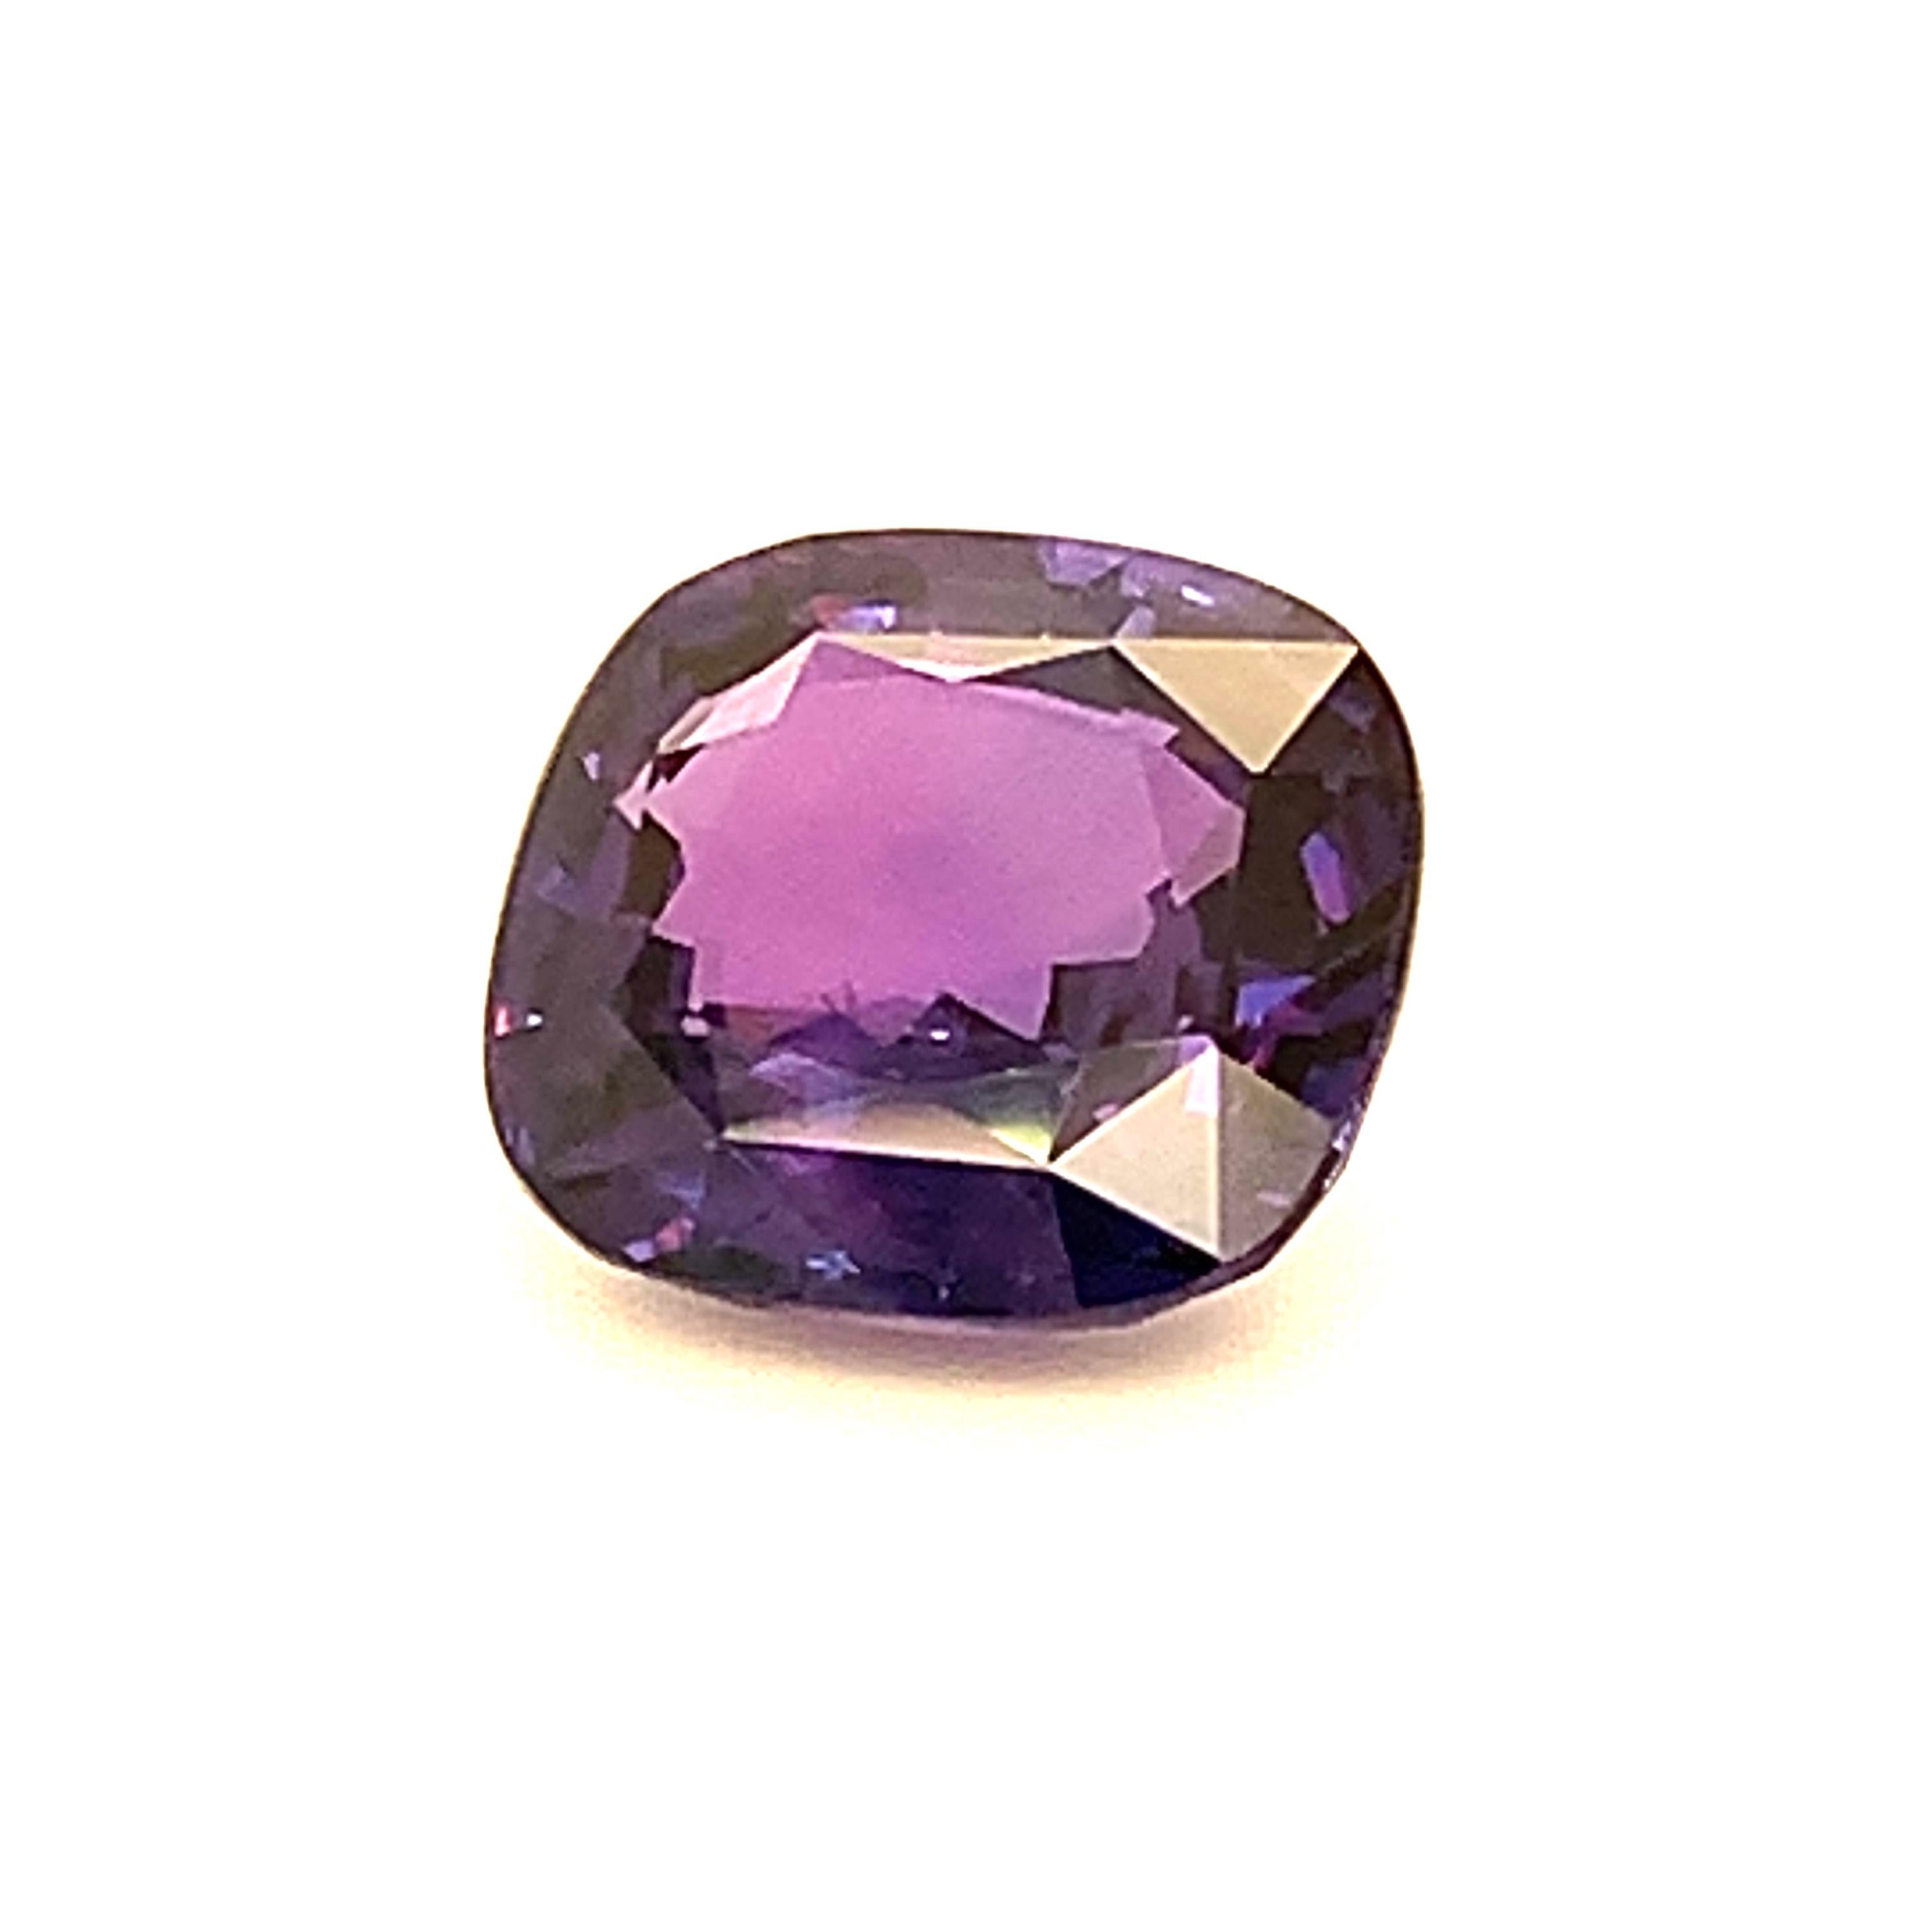 6.76 Carat Color Change Sapphire Cushion, Unset Loose Gemstone, GIA Certified 5